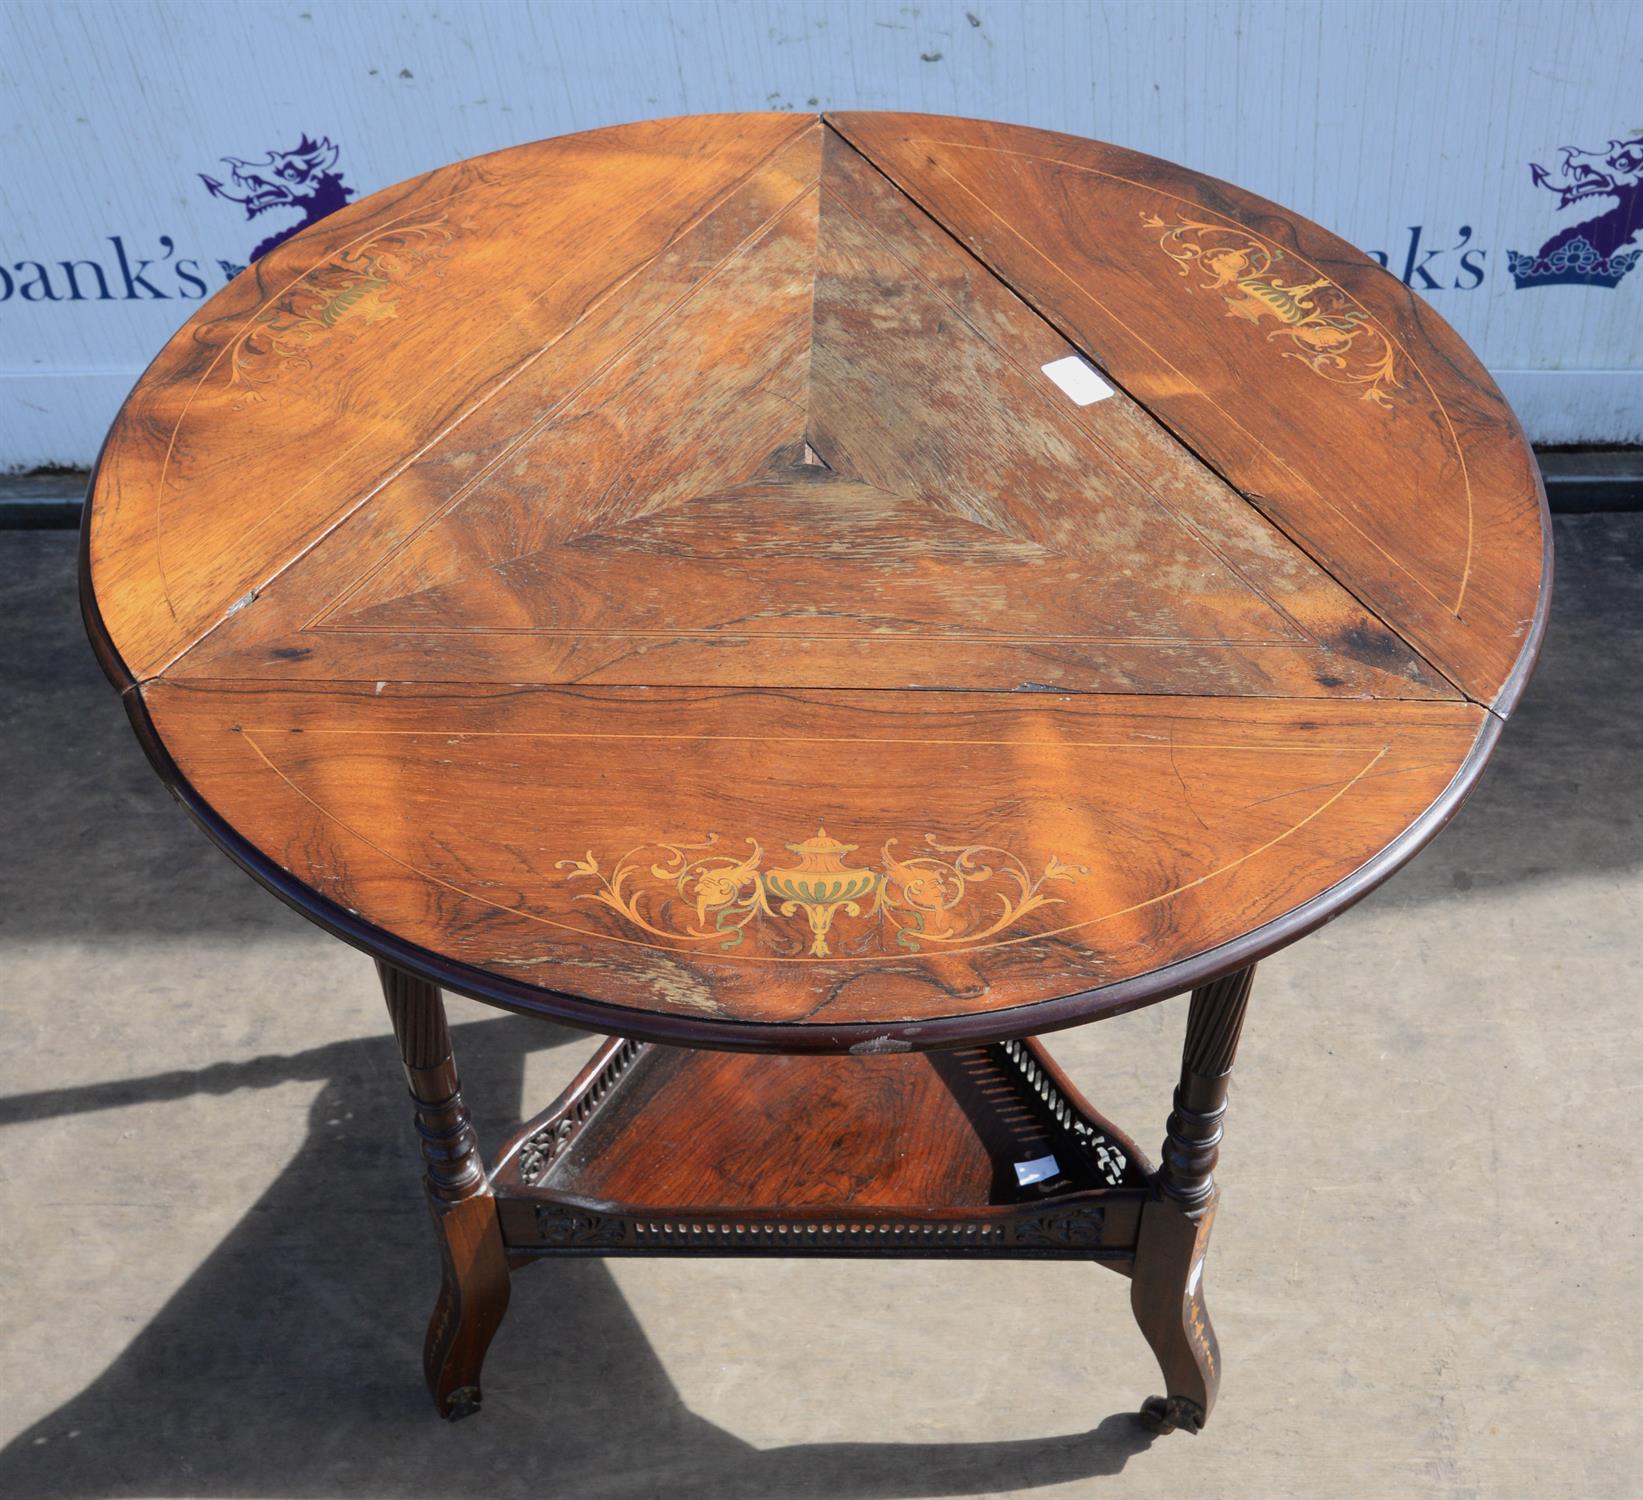 An Edwardian rosewood and inlaid envelope occasional table, each flap inlaid with flowering urns, - Image 3 of 4